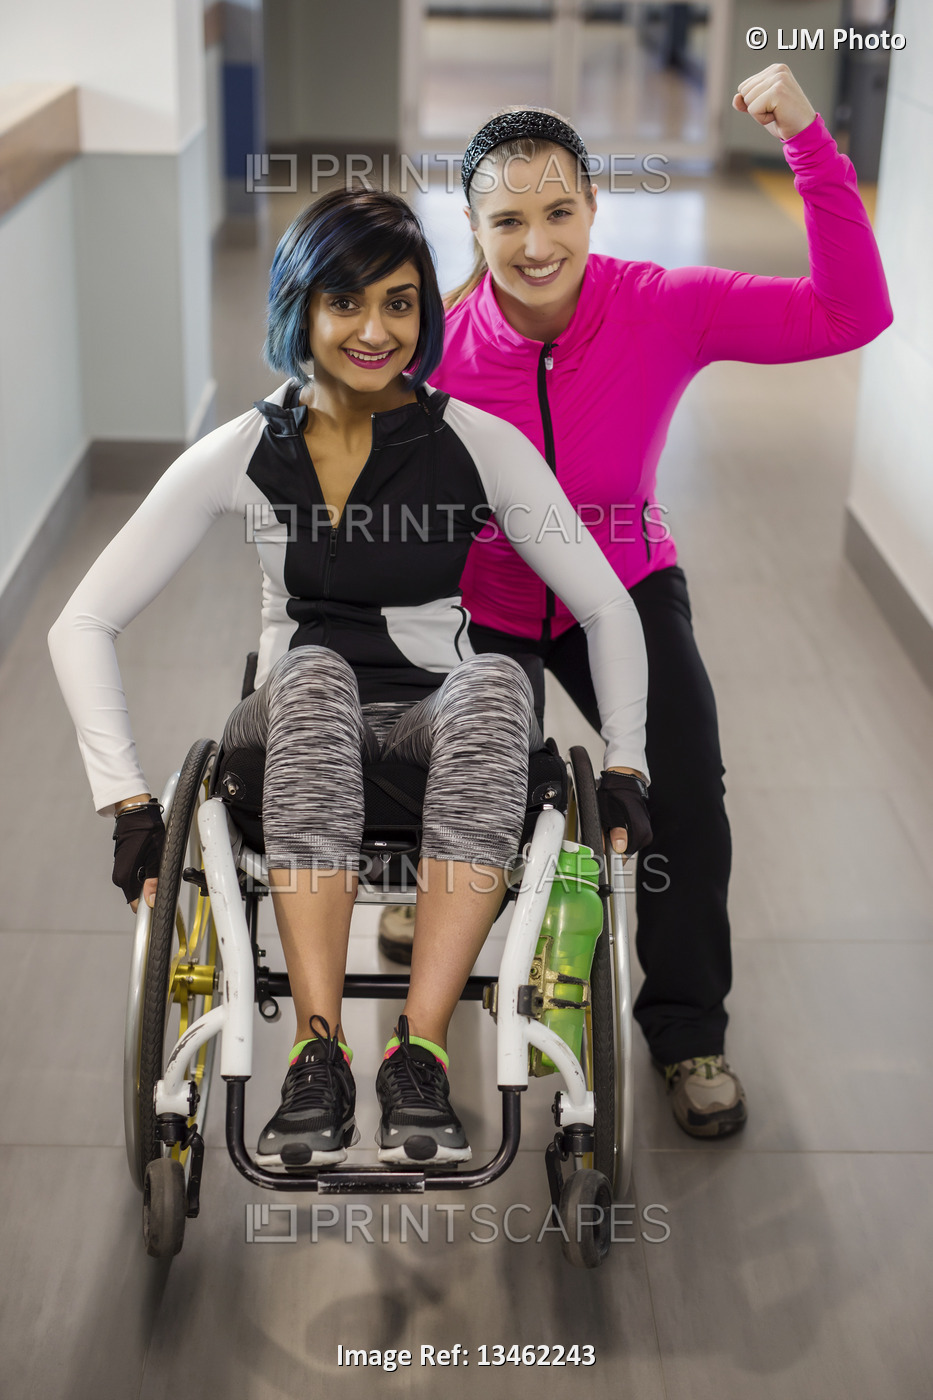 A paraplegic woman and her trainer pose for the camera while in a hallway in a ...